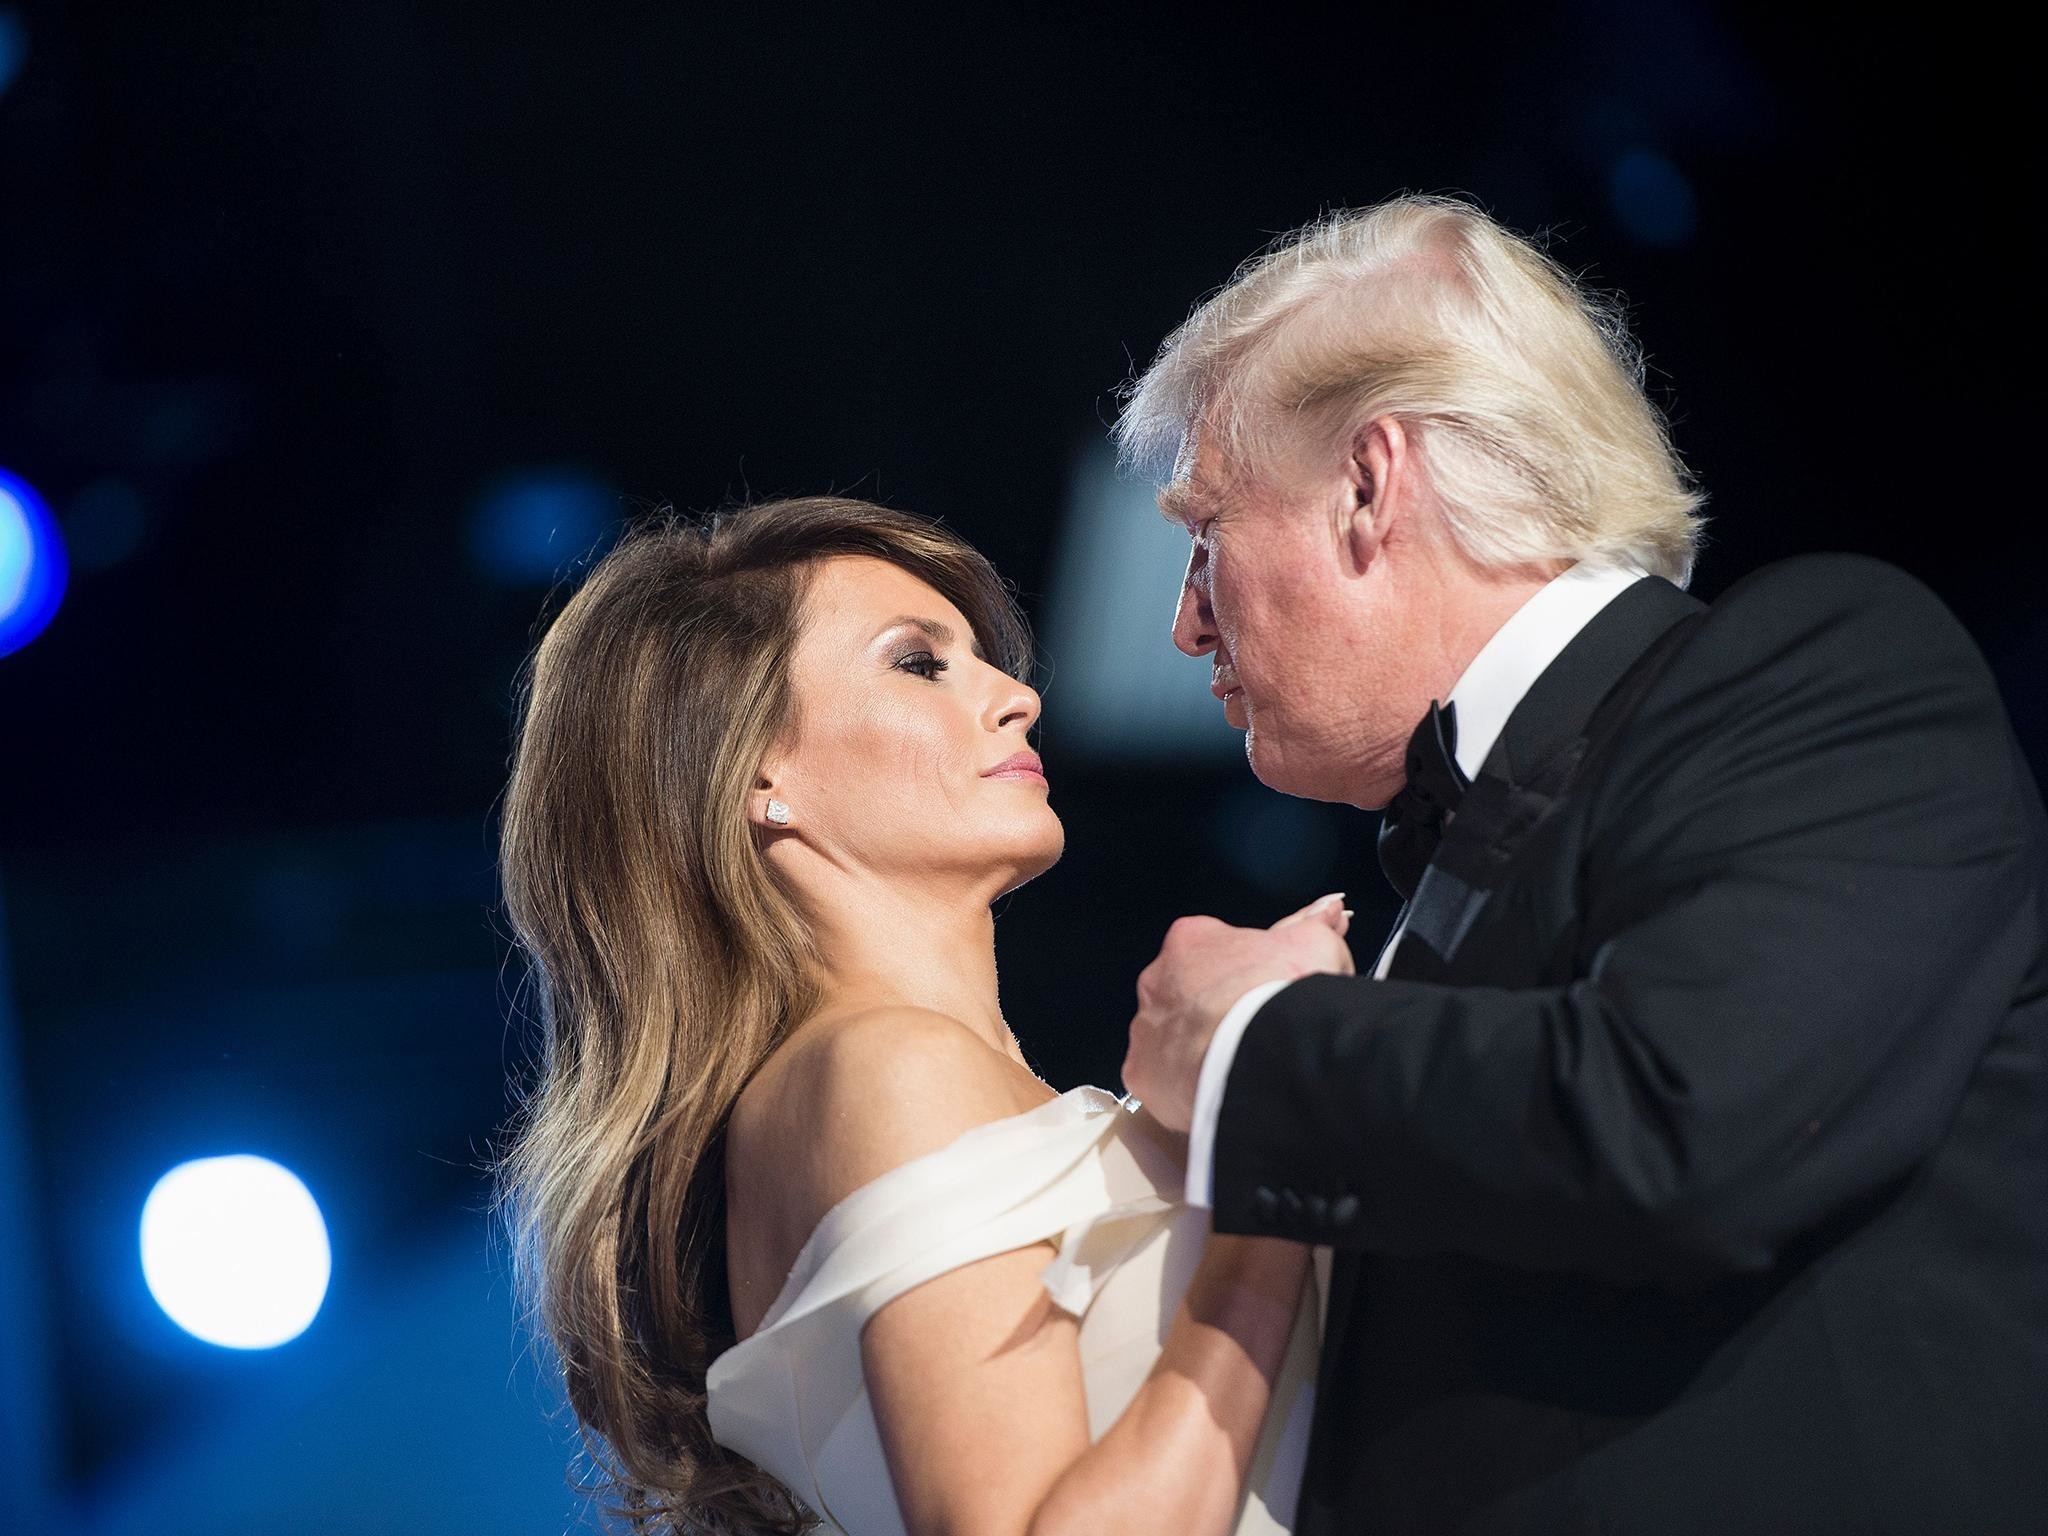 Melania Trump walking on egg shells and uncomfortable in her own skin, says body language expert The Independent